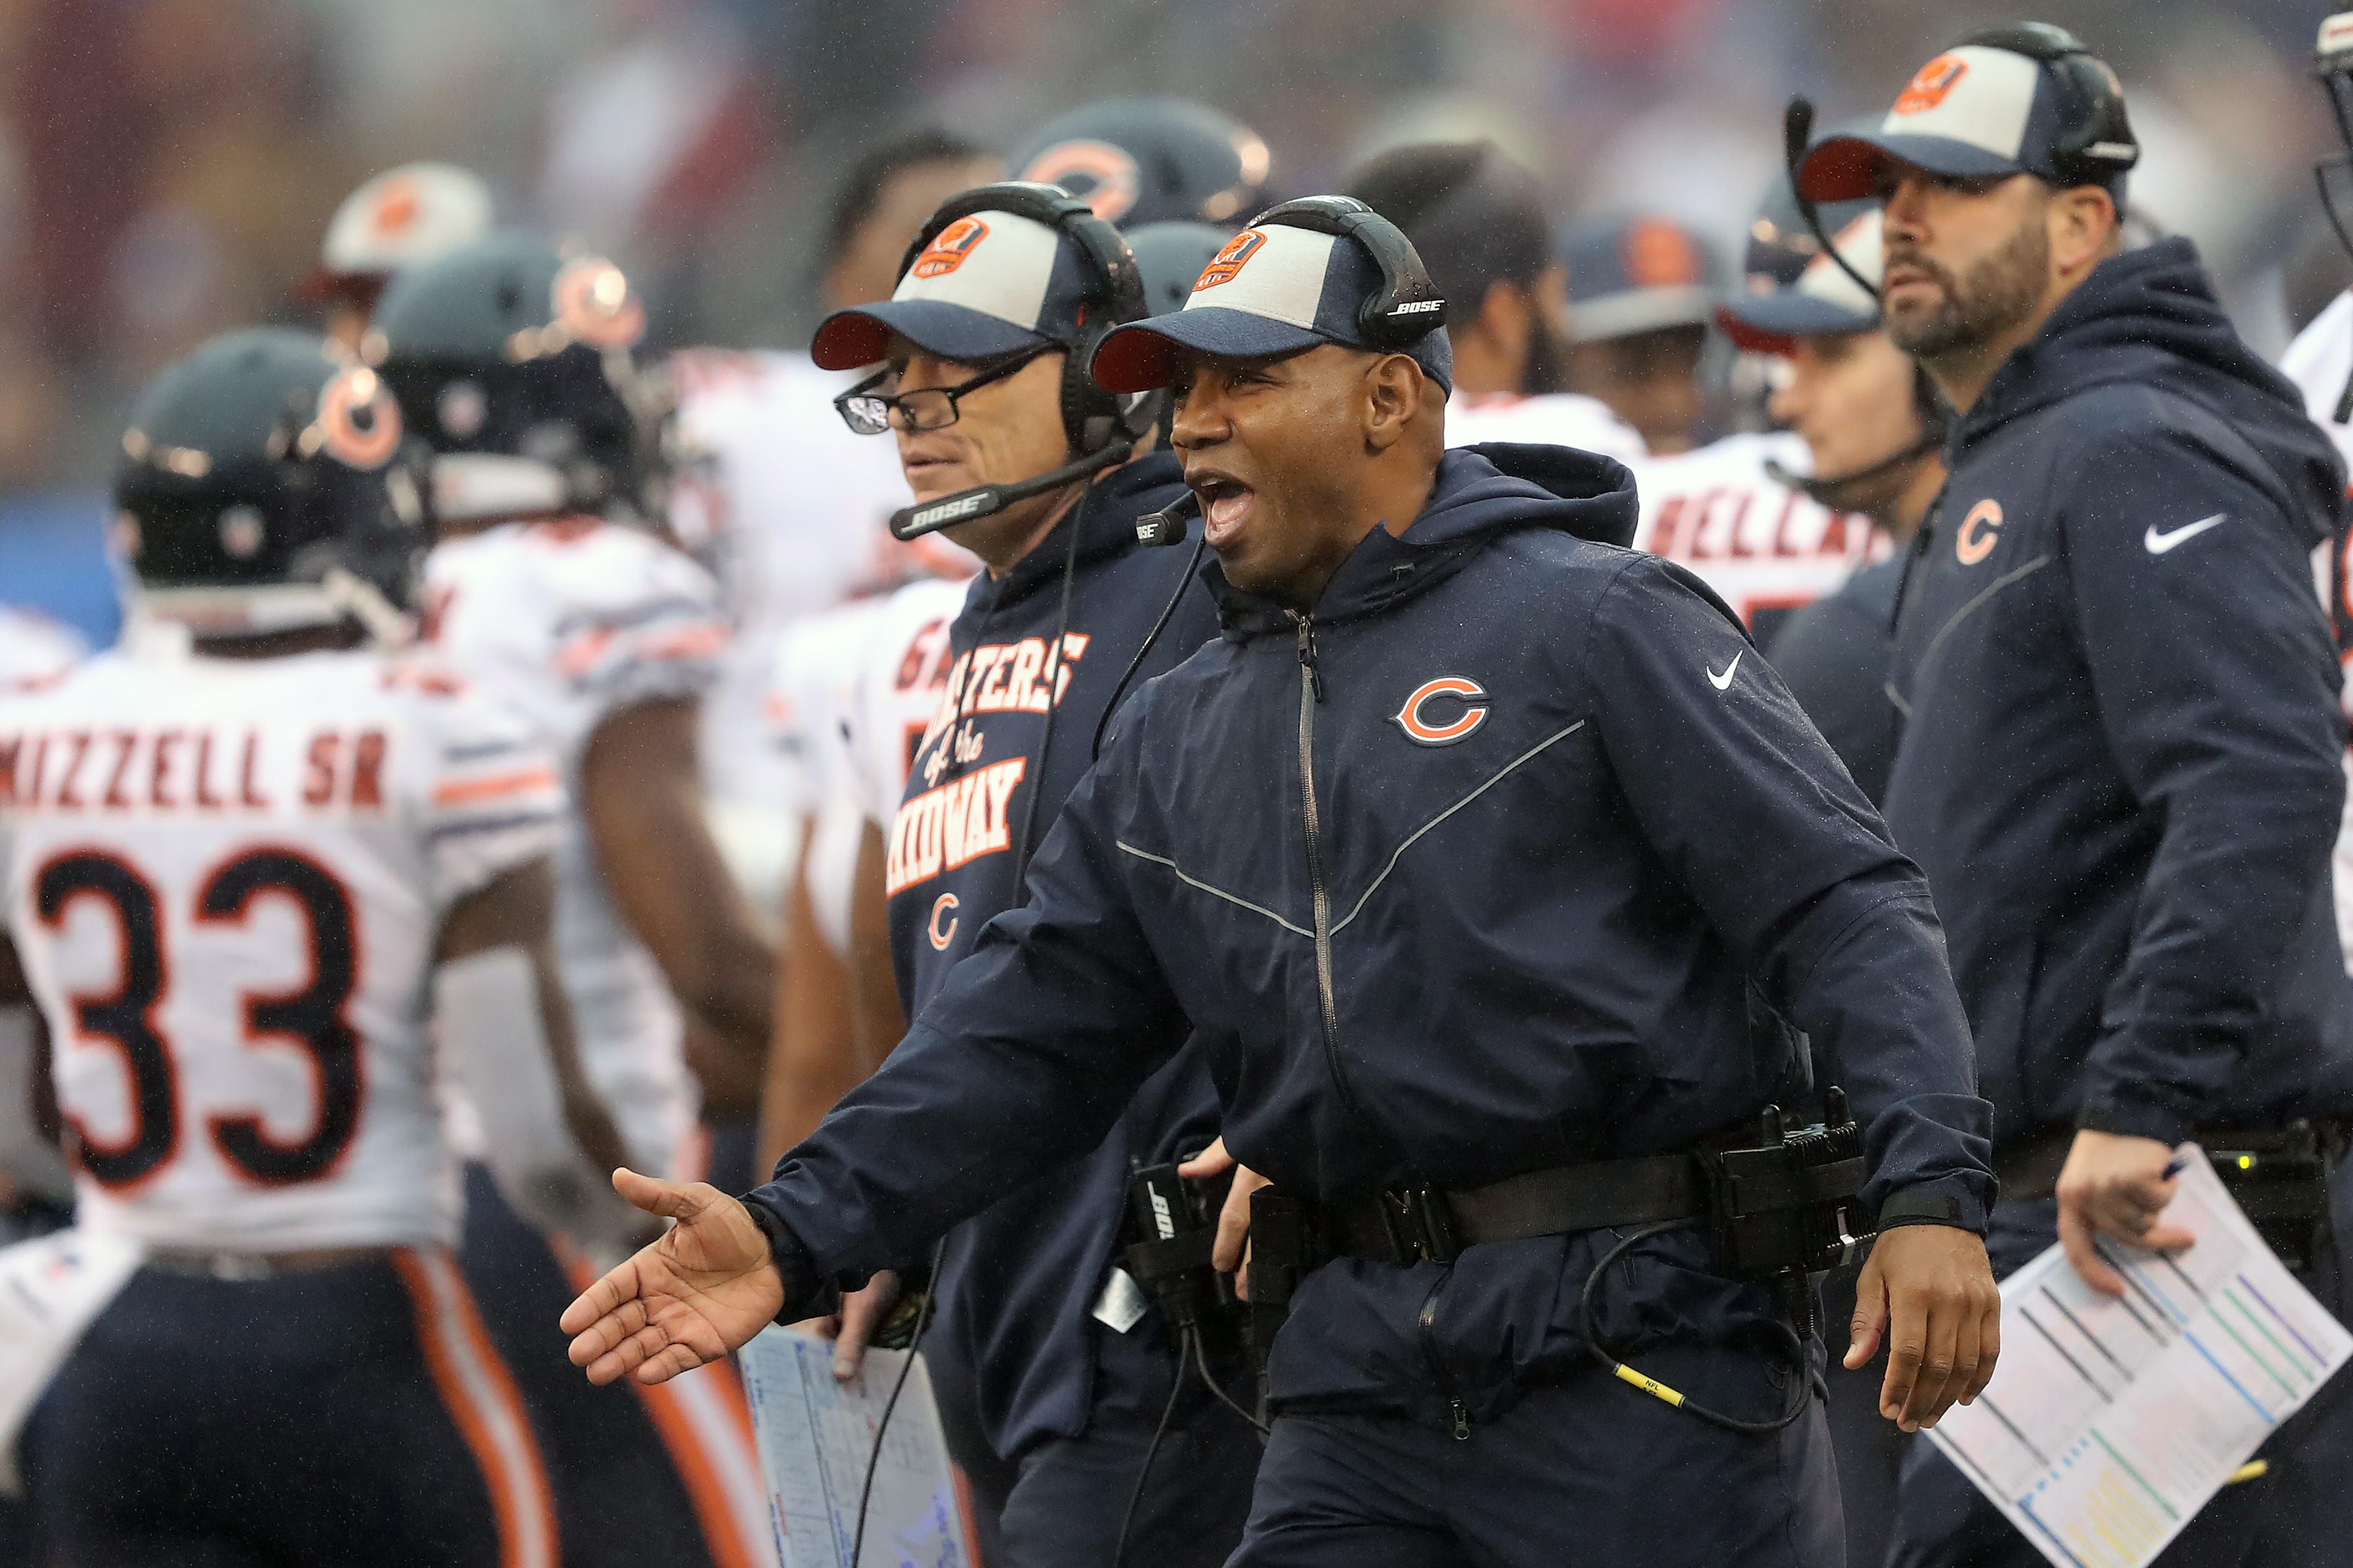 Chicago Bears running backs coach Charles London reacts against the New York Giants during the second quarter at MetLife Stadium on December 02, 2018 in East Rutherford, New Jersey.